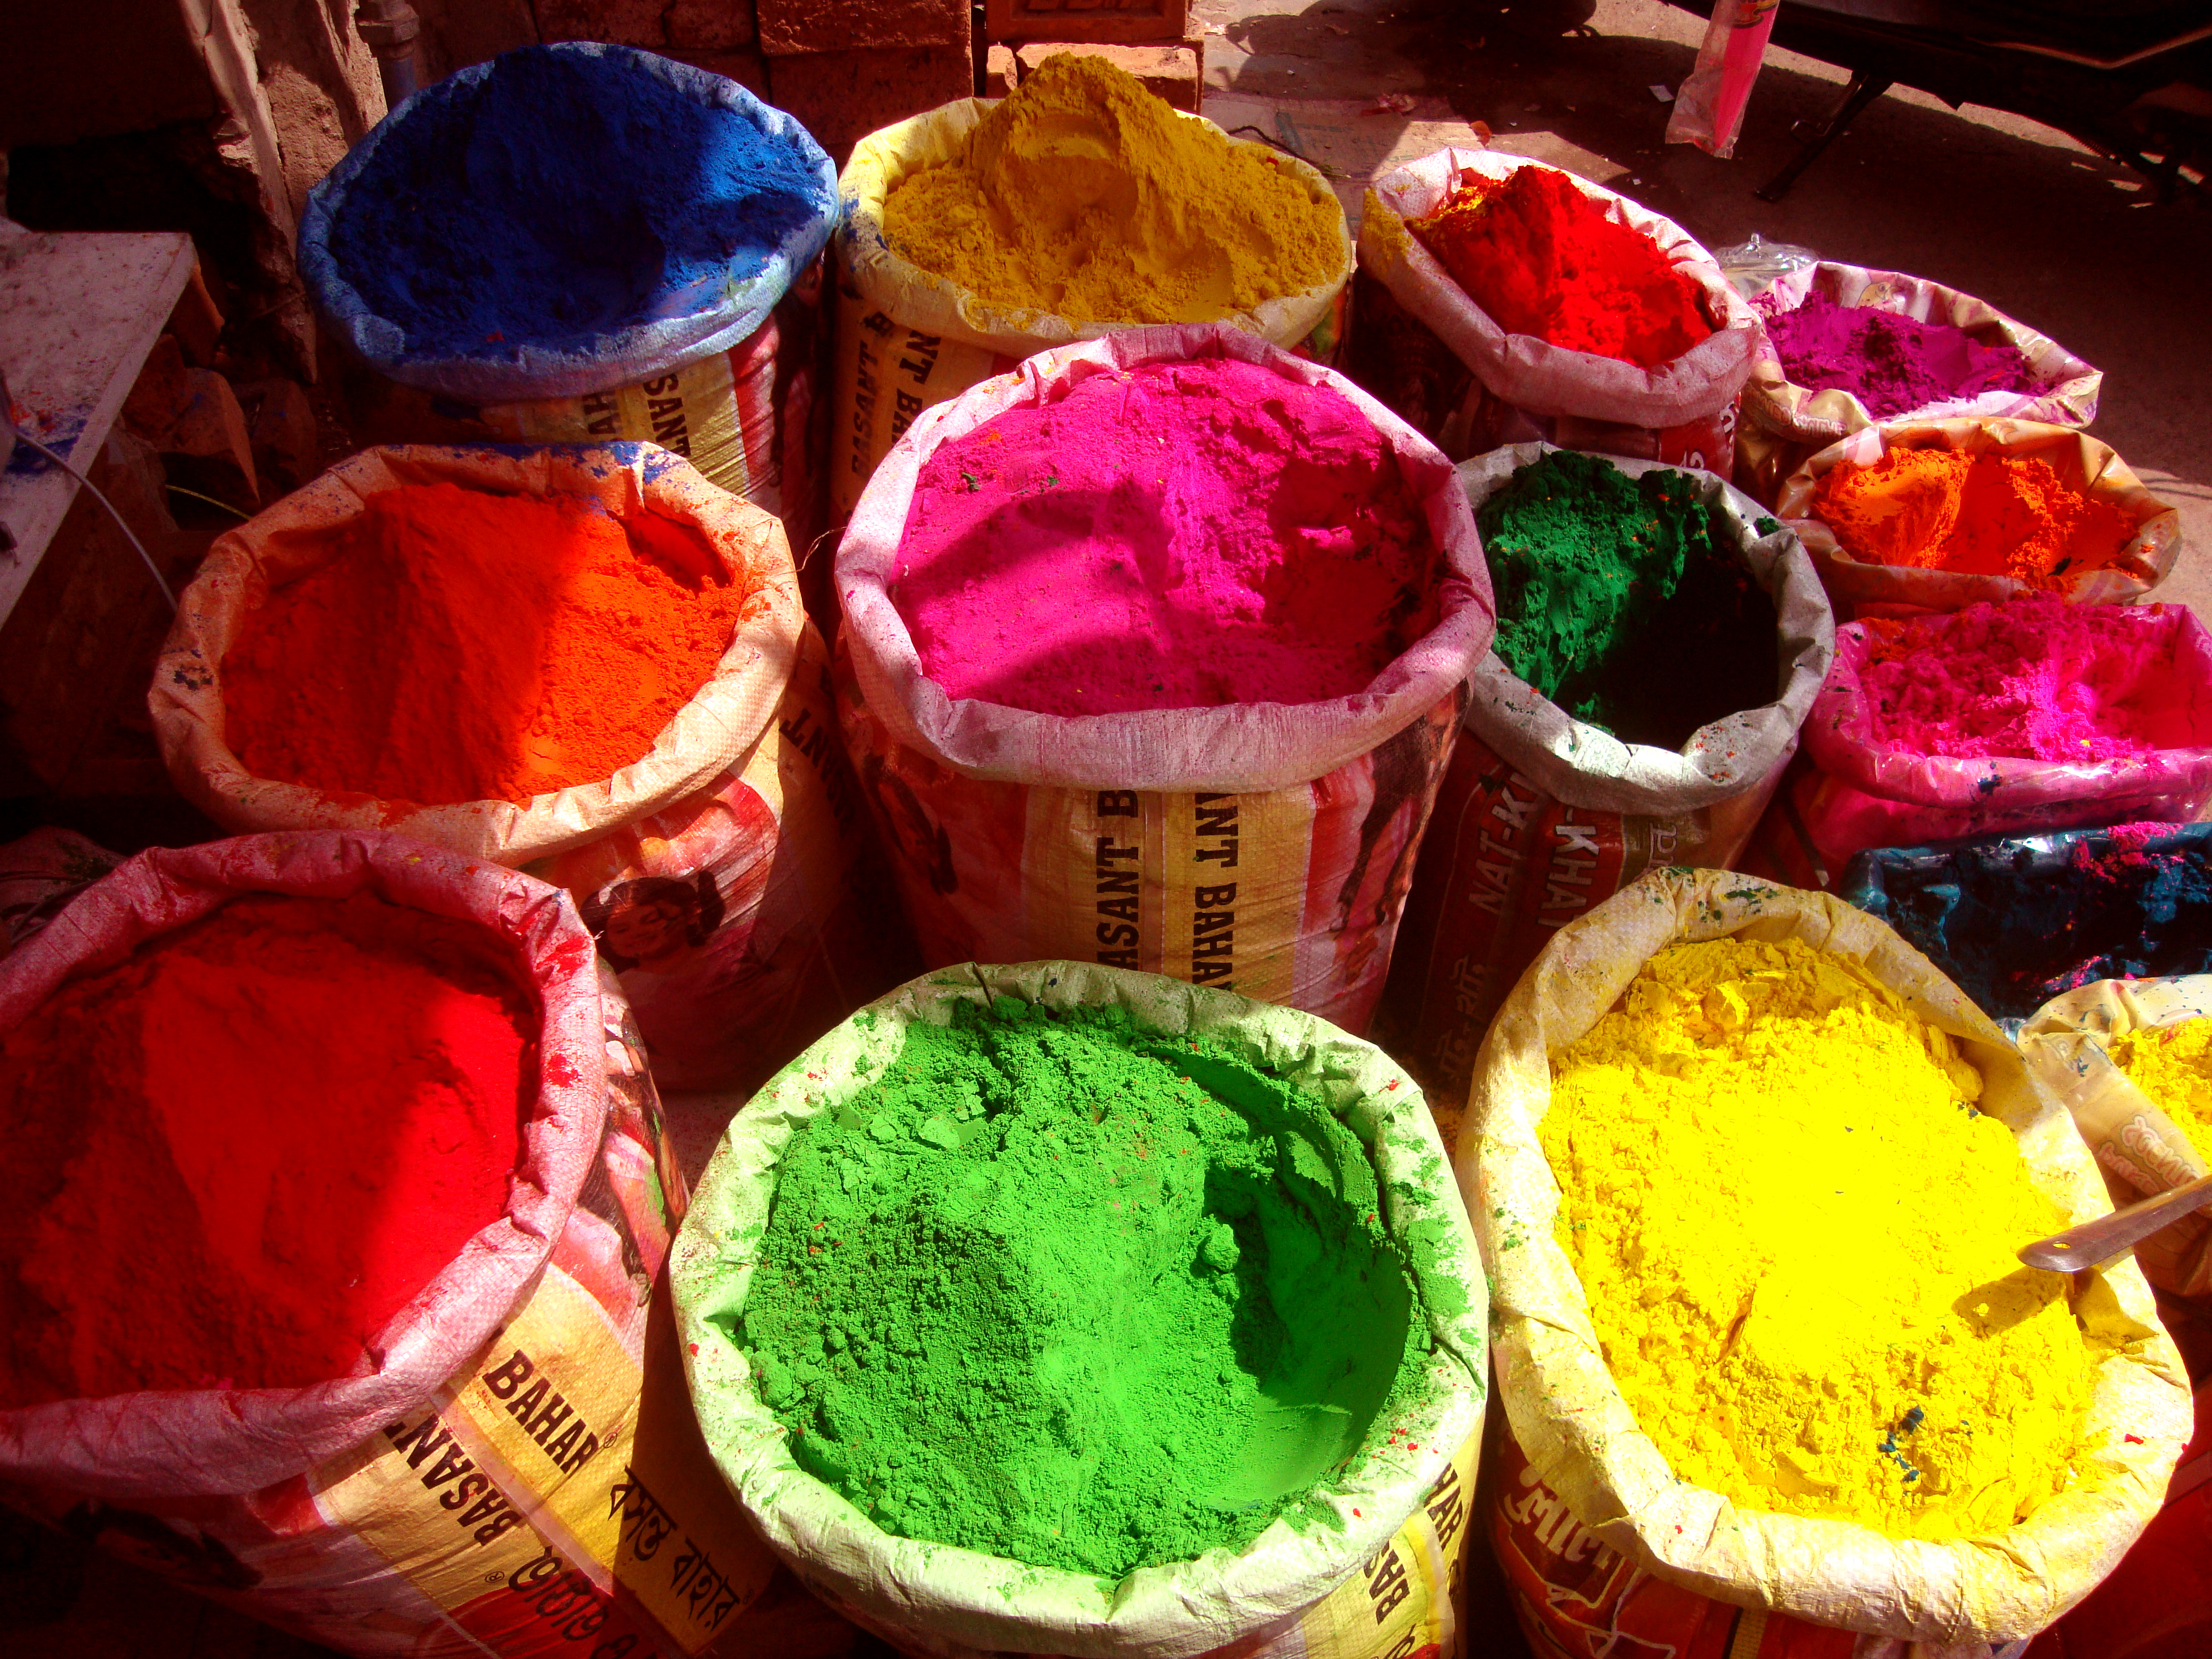 Large sacks of brightly colored powder sit in an outdoor market stall